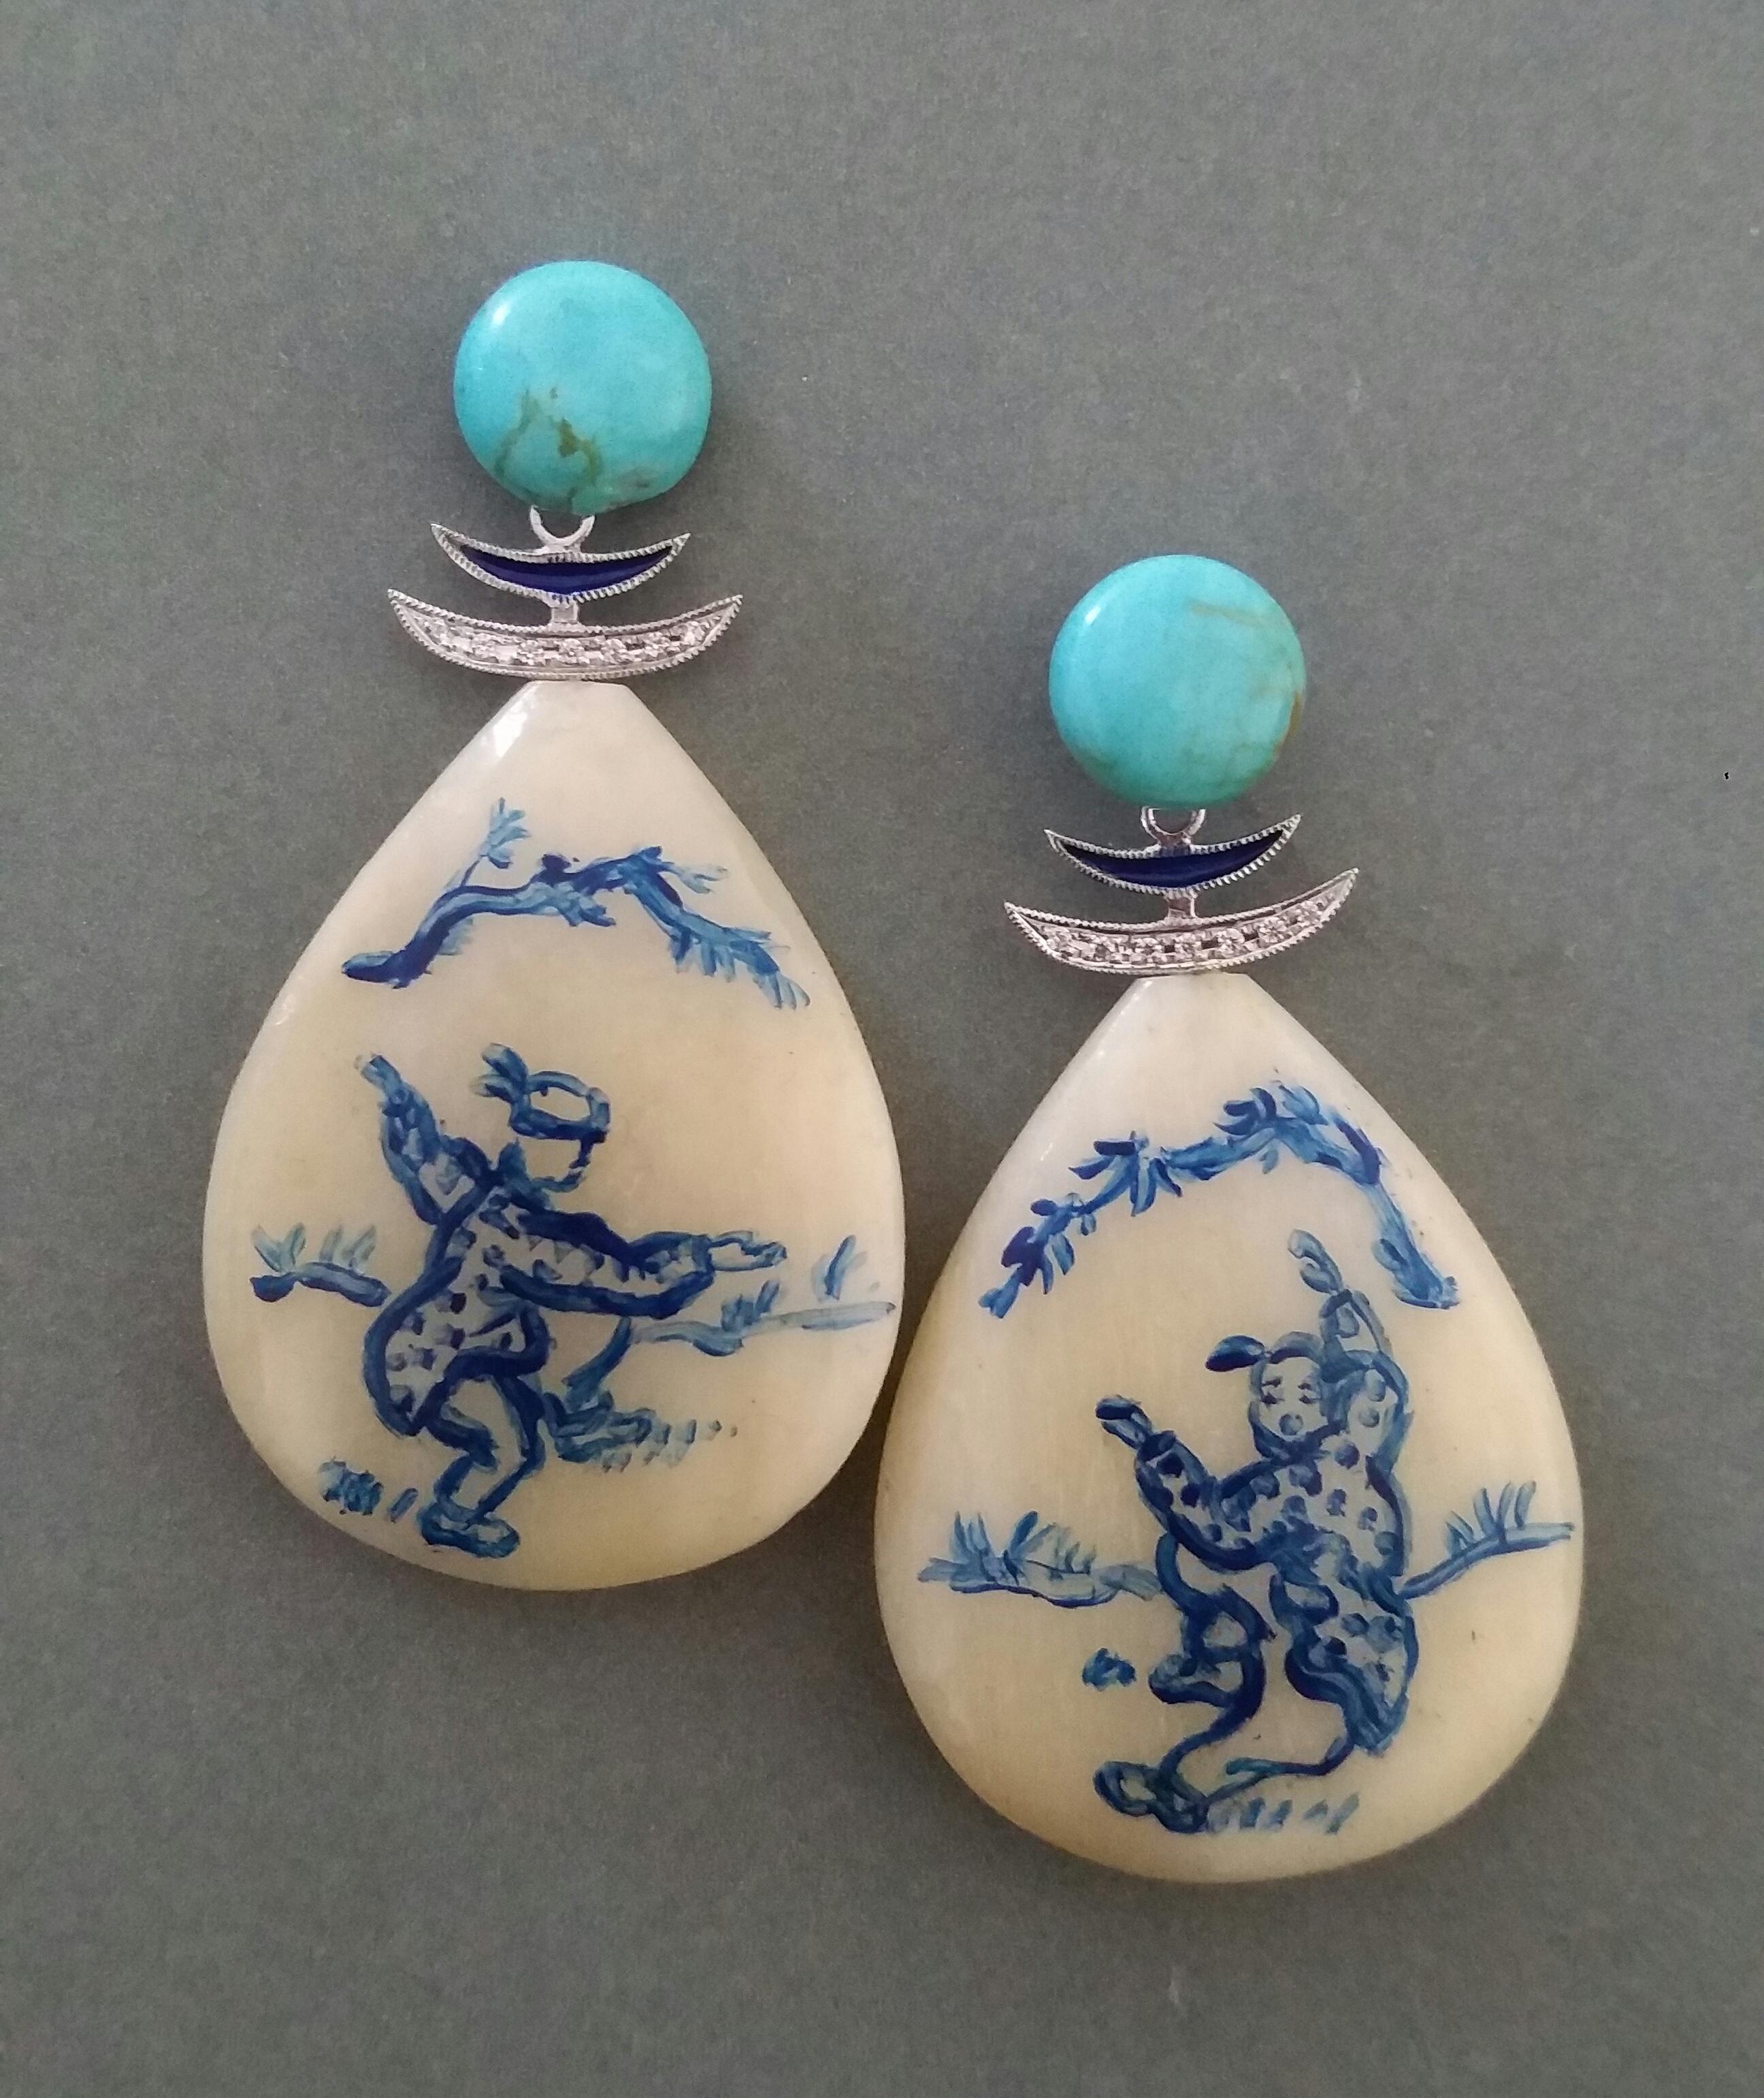 Vintage drop shape hand painted cow bones flat drops depicting 2  young chinese boys playing in a open space,suspended from 2 round Turquoise cabochons 10 mm in diameter,in the middle we have 2 white gold parts with diamonds and blue Enamels

In